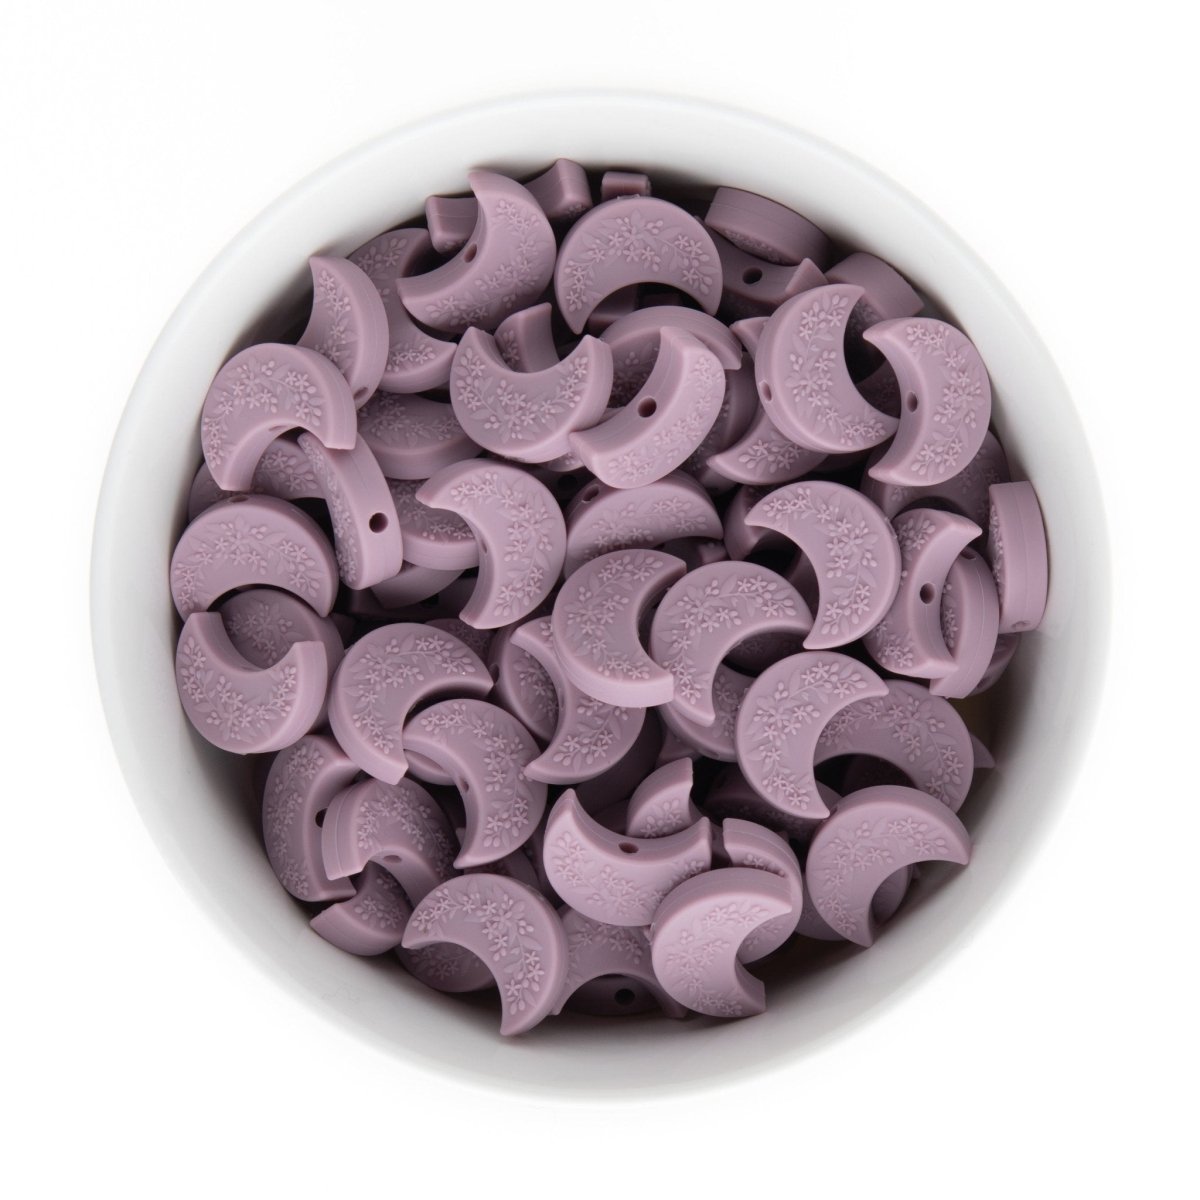 Silicone Focal Beads Crescent Moon Mauve from Cara & Co Craft Supply